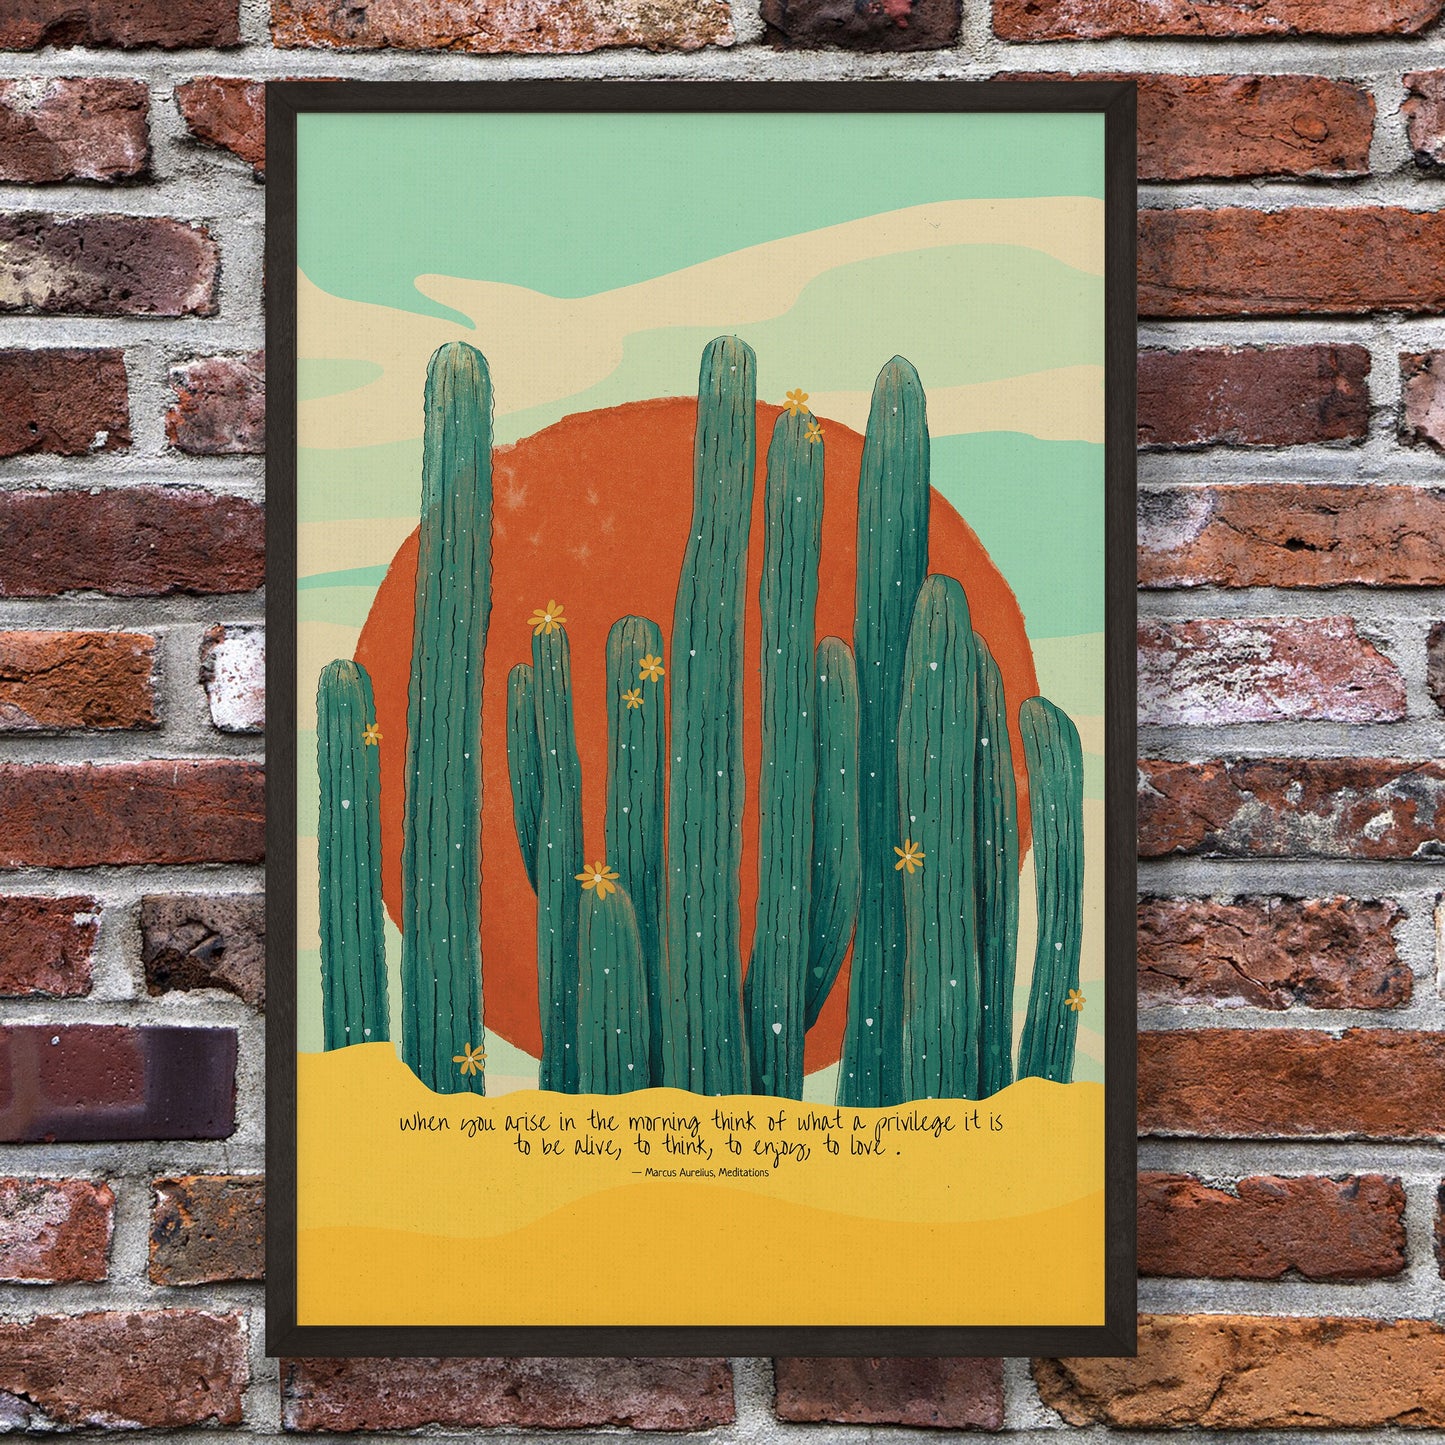 Marcus Aurelius quote for gratitude for life and a scenic illustration of Sun & cactus poster in black frame mockup